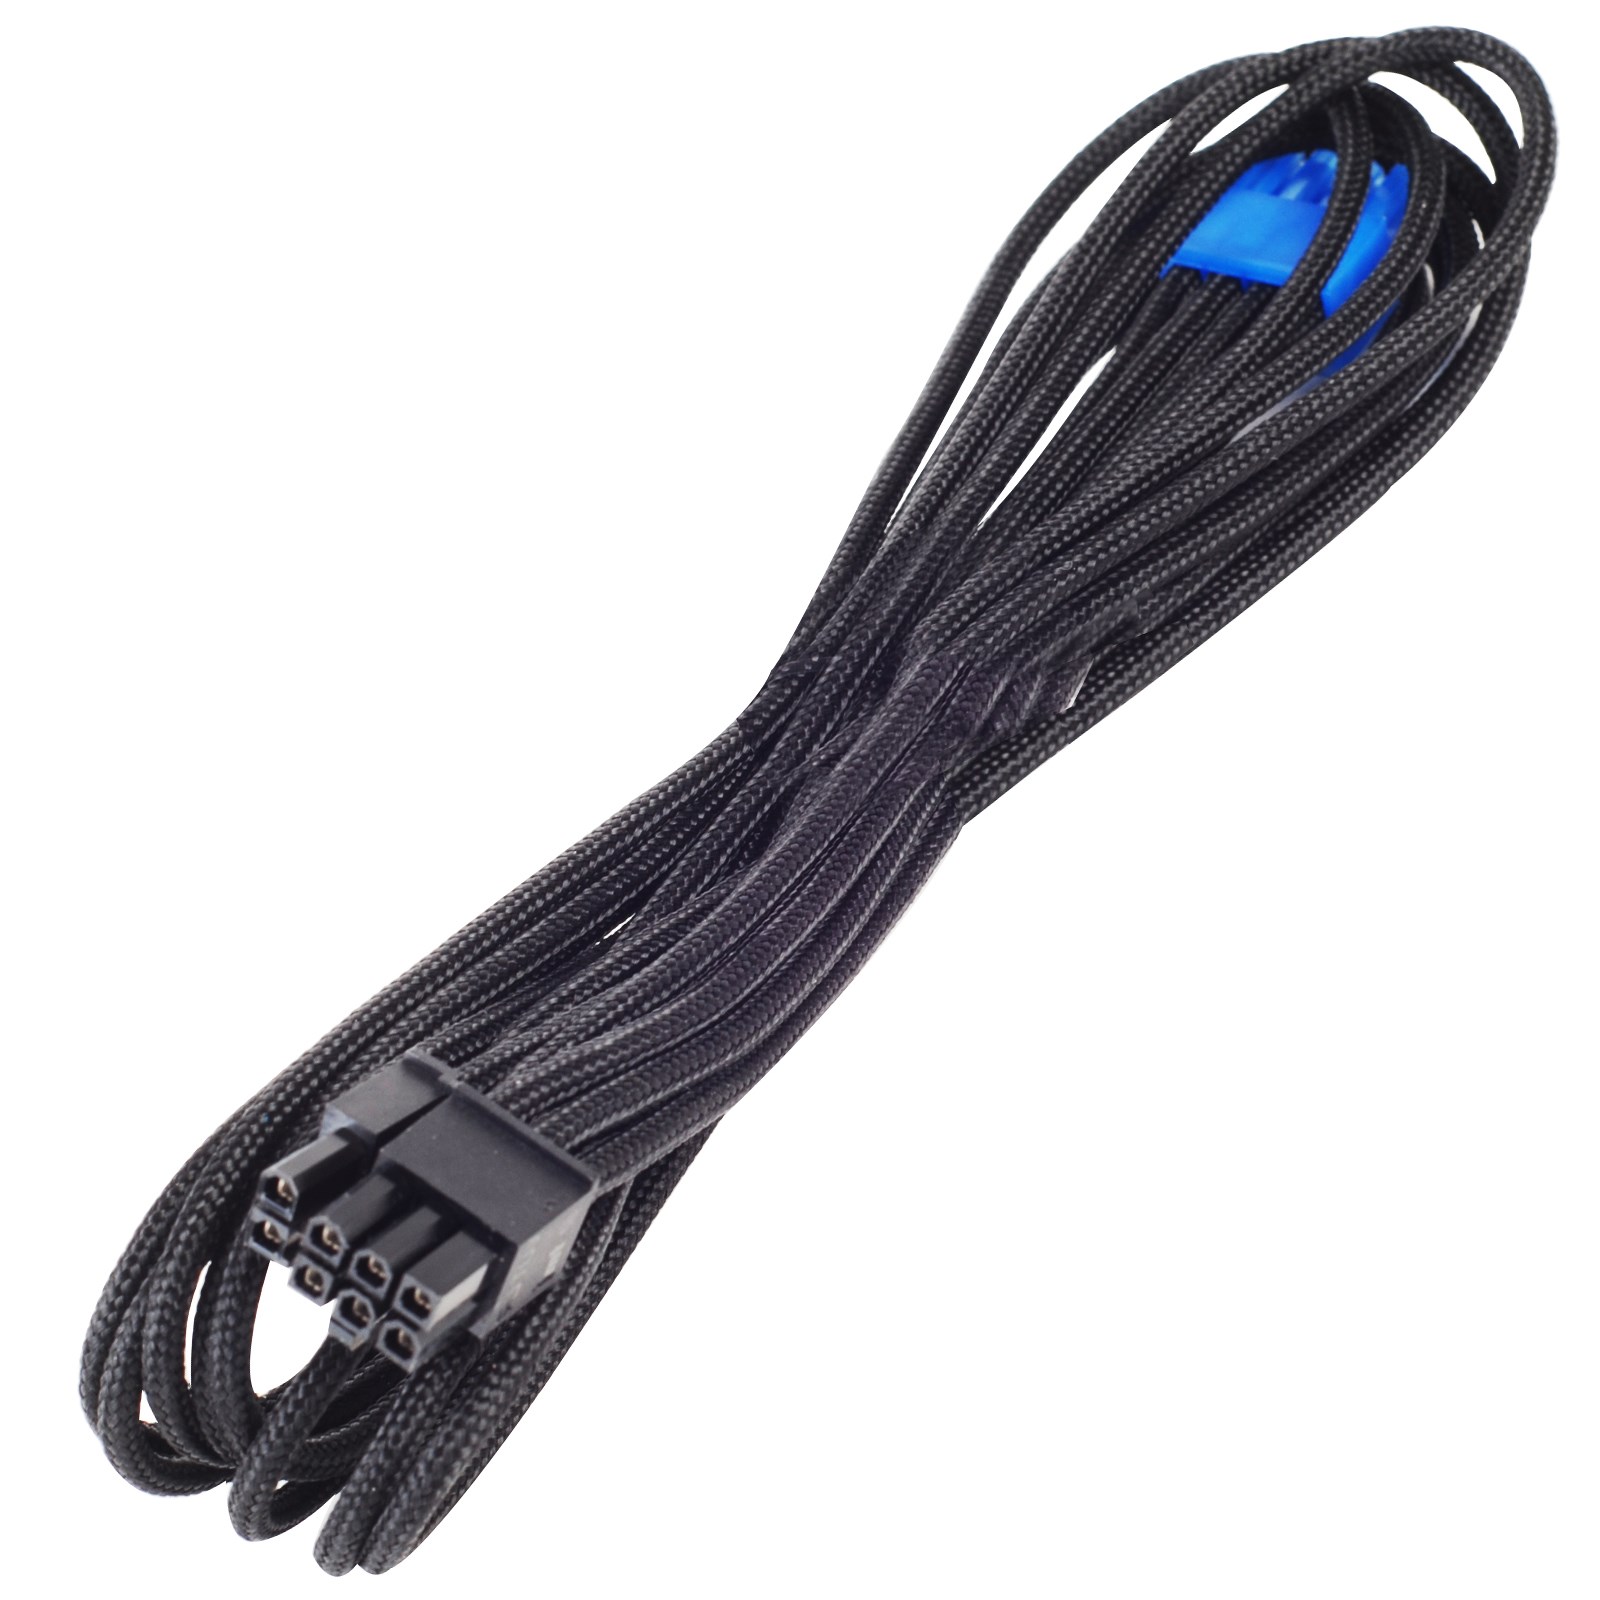 Photos - Cable (video, audio, USB) SilverStone PP06B-PCIE55 550mm 6+2 PCIe Sleeved Cable in Black SST-PP06B-P 